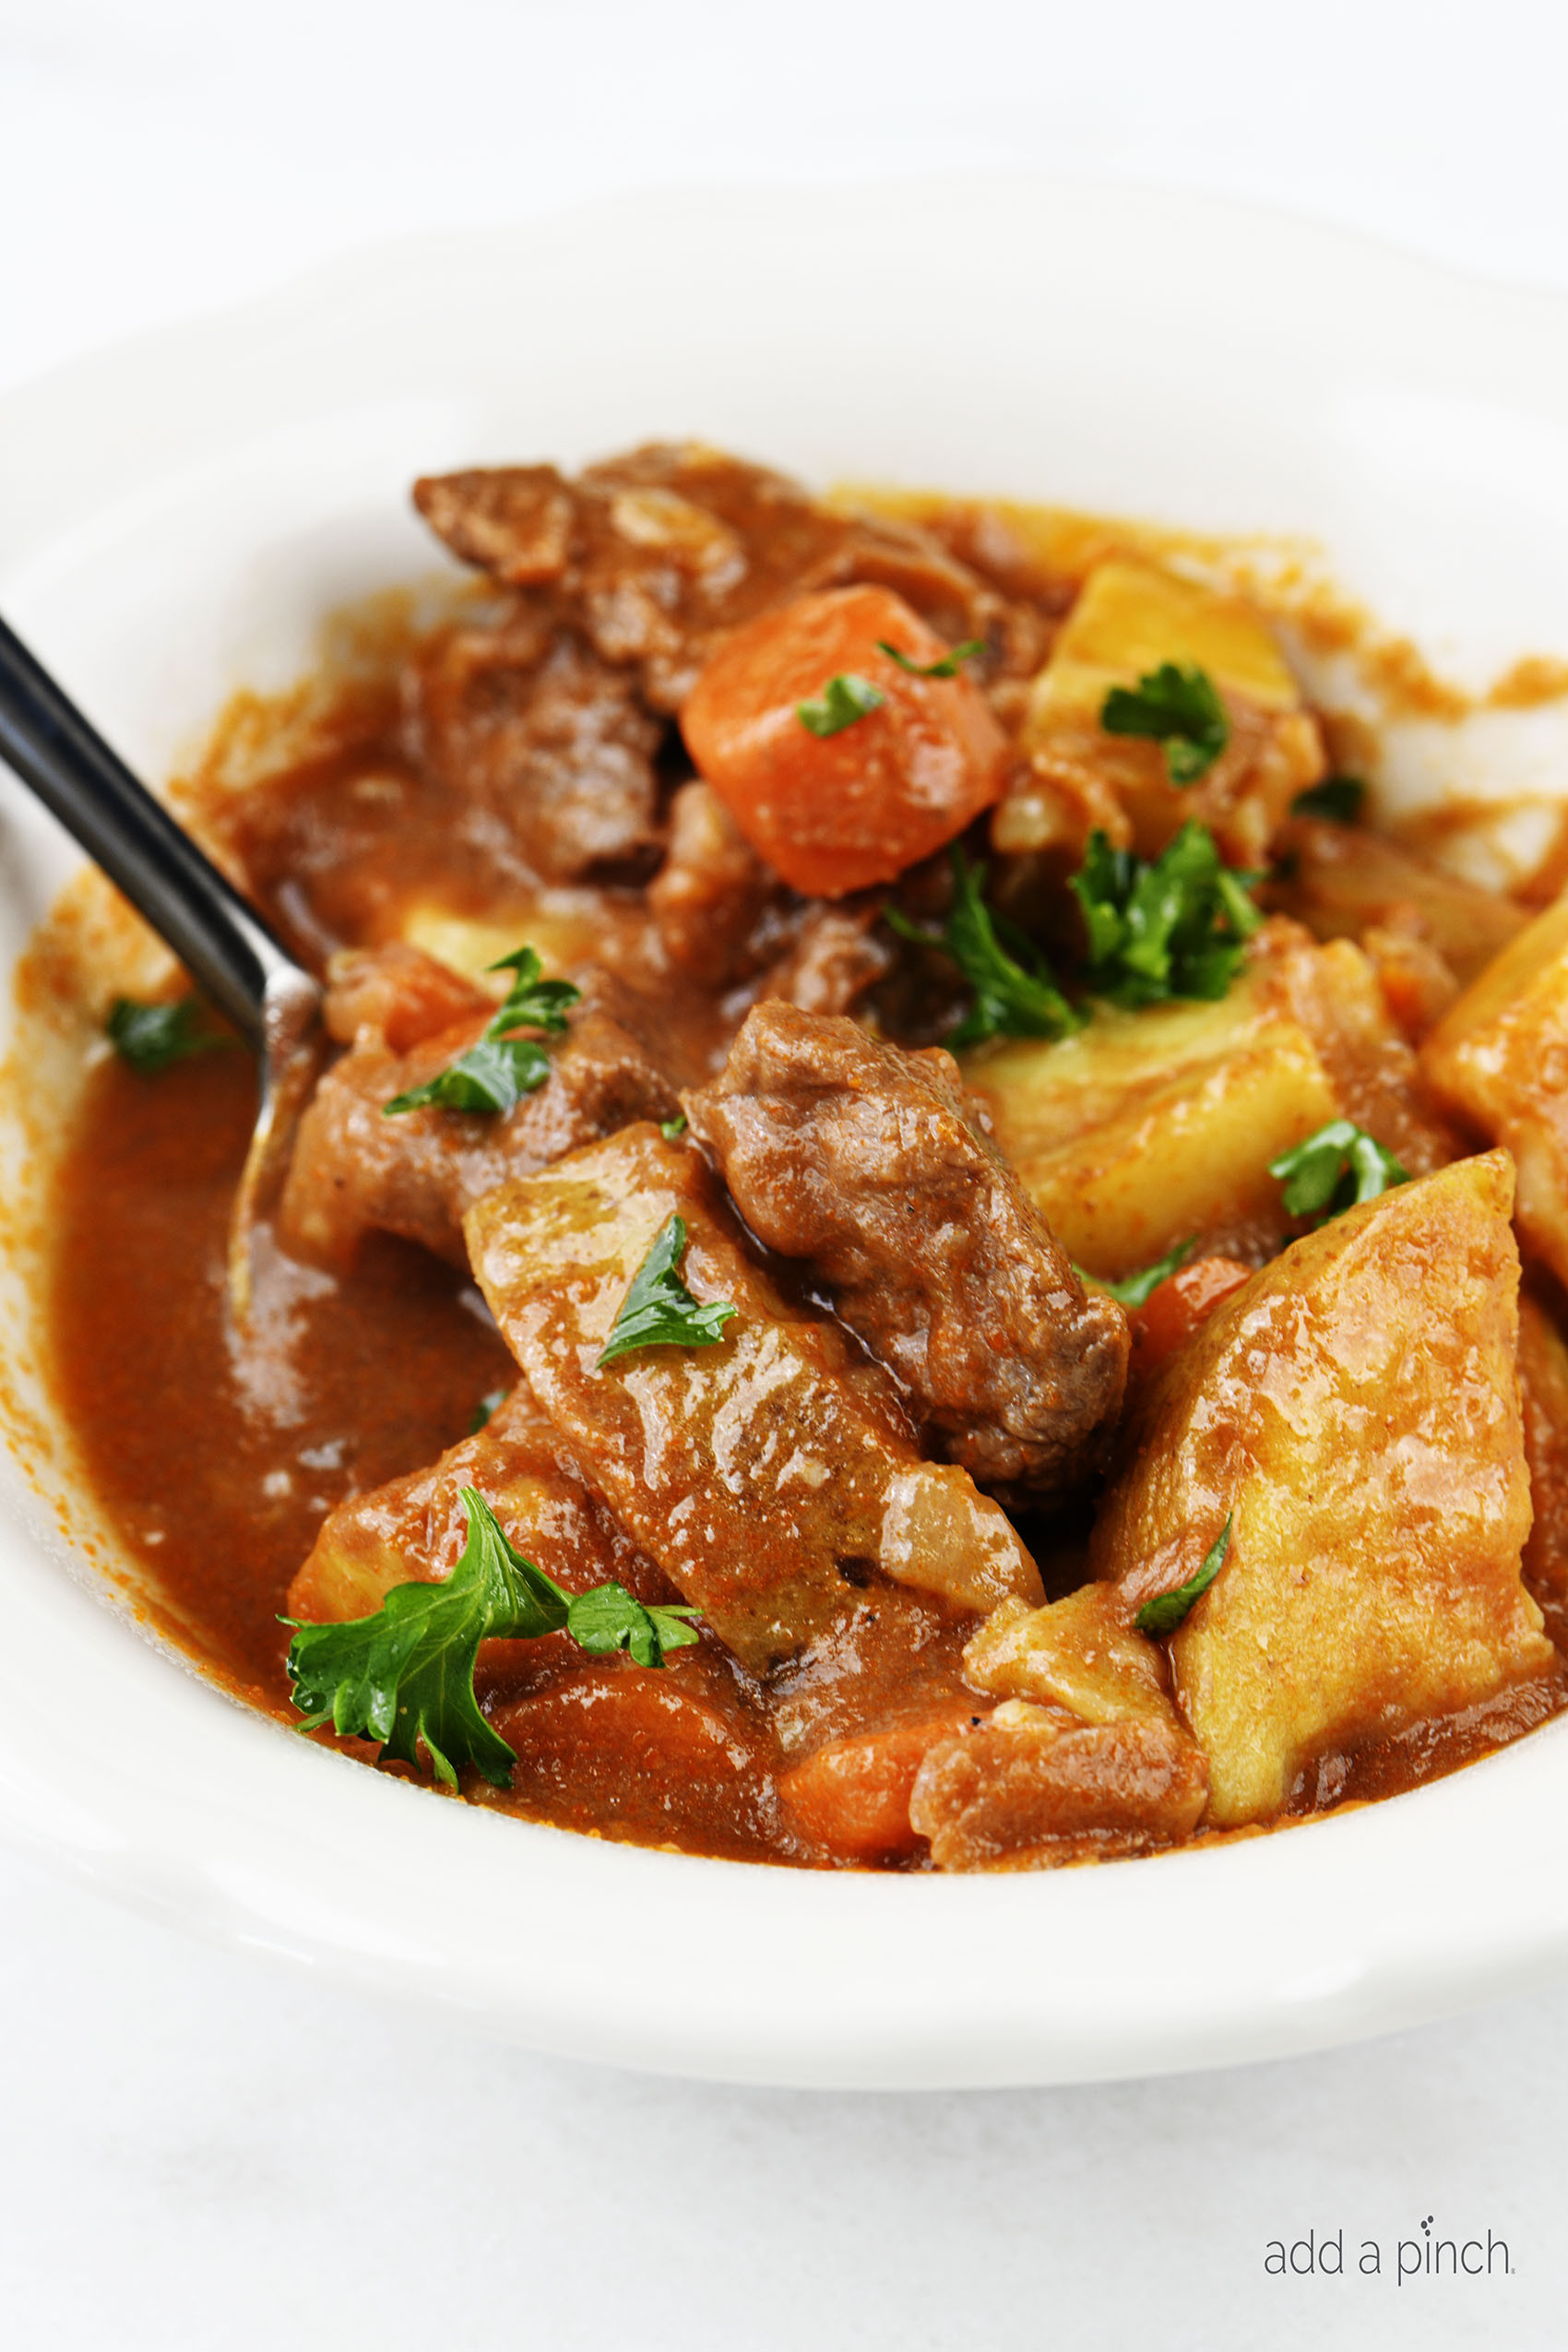 Instant Pot Recipe For Beef Stew
 The Best Instant Pot Beef Stew Recipe Add a Pinch